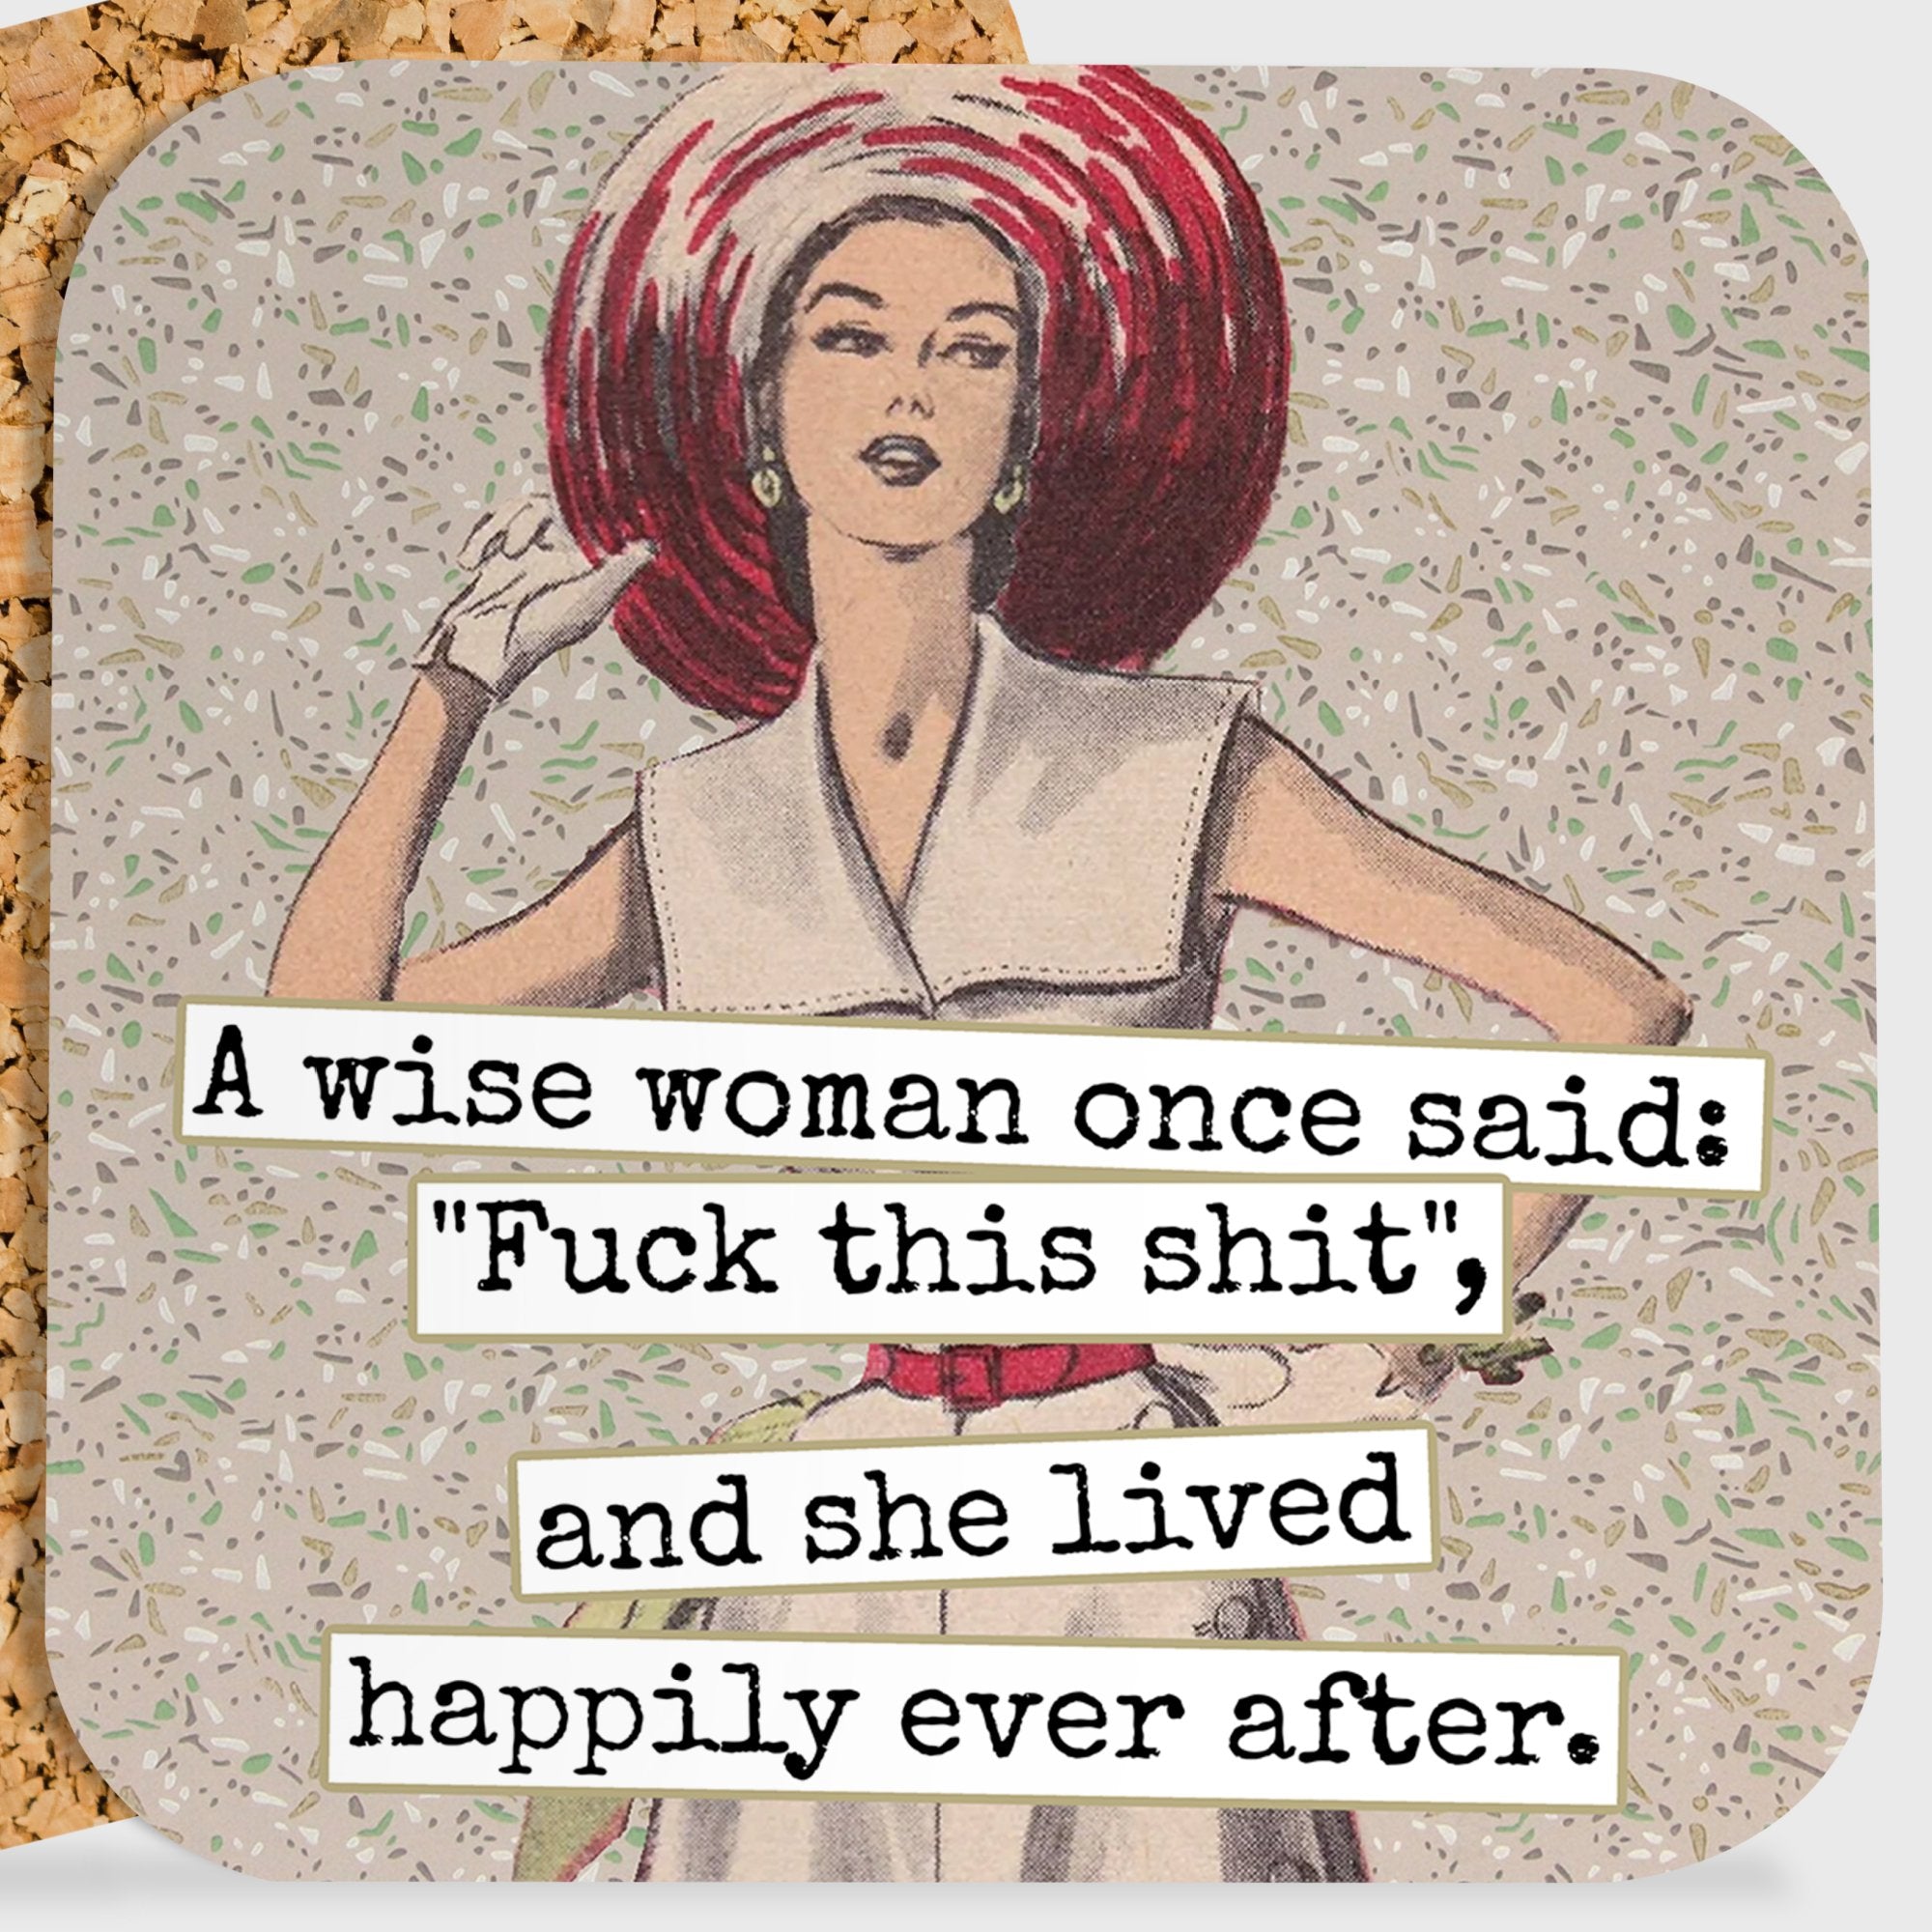 COASTER. A Wise Woman Once Said: "Fuck This Shit"... - My Filosophy